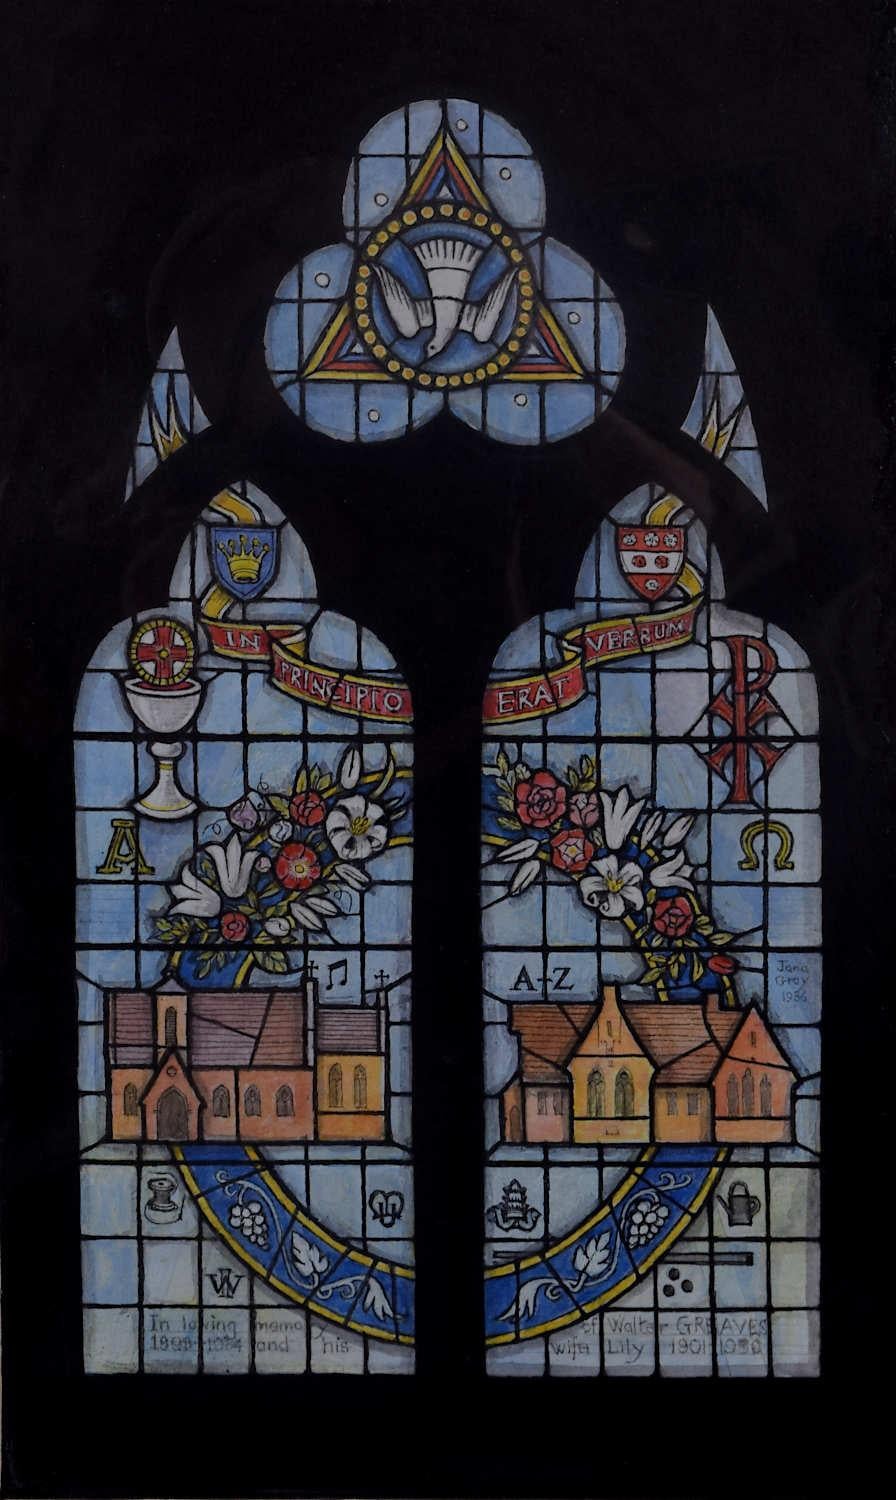 We acquired a series of watercolour stained glass designs from Jane Gray's studio. To find more scroll down to "More from this Seller" and below it click on "See all from this seller." 

Jane Gray (b.1931)
Stained Glass Design
Watercolour
23 x 14